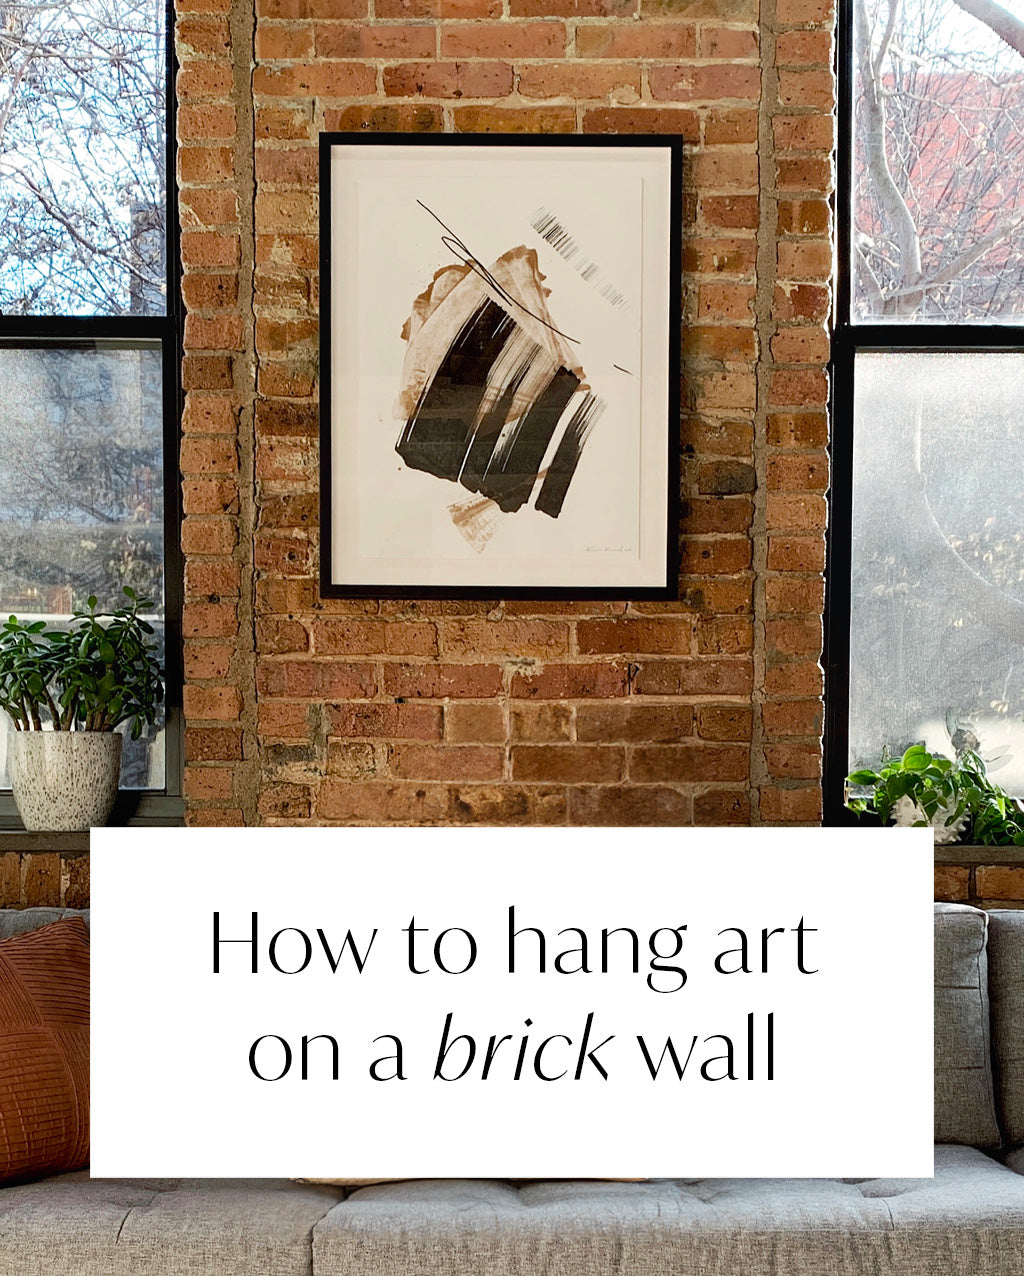 How to hang art on a brick wall